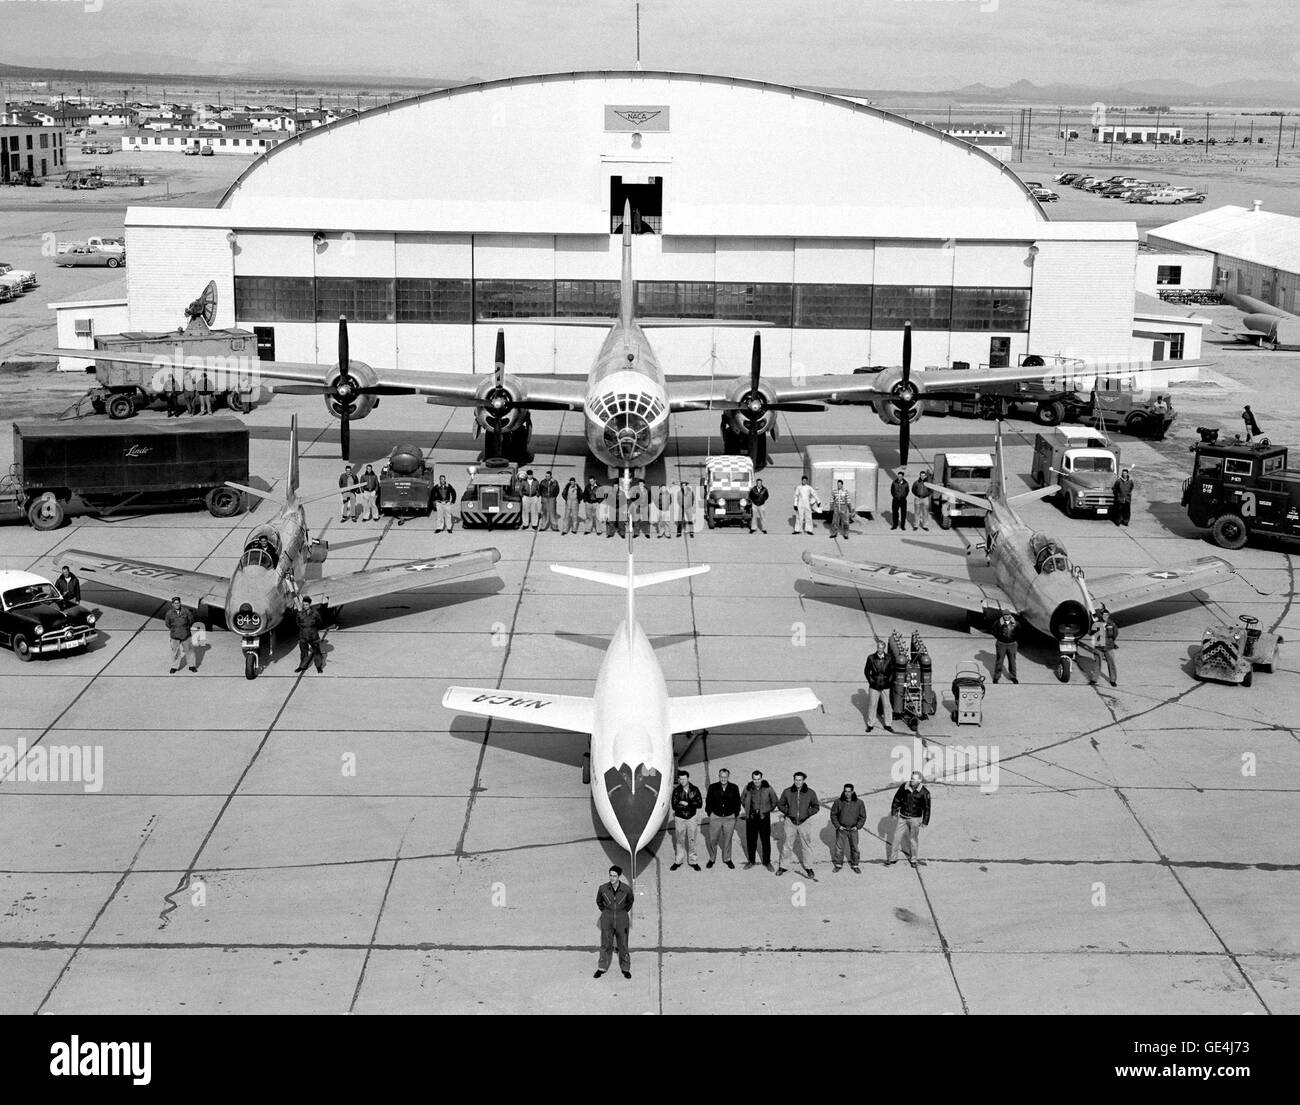 The fleet of NACA test aircraft are assembled in front of the hangar at the High Speed Flight Station, (later renamed the Dryden Flight Research Center) in Edwards, California. The white aircraft in the foreground is a Douglas Aircraft D-558-2 Skyrocket. To its left and right are North American F-86 Sabre chase aircraft. Directly behind the D-558-2 is the P2B-1 Superfortress, (the Navy version of the Air Force B-29). Also known as the &quot;mothership,&quot; the P2B-1 carried aloft the D-558-2 Skyrocket under its fuselage. Once reaching altitude, the D-558-2 was released from the &quot;mothers Stock Photo